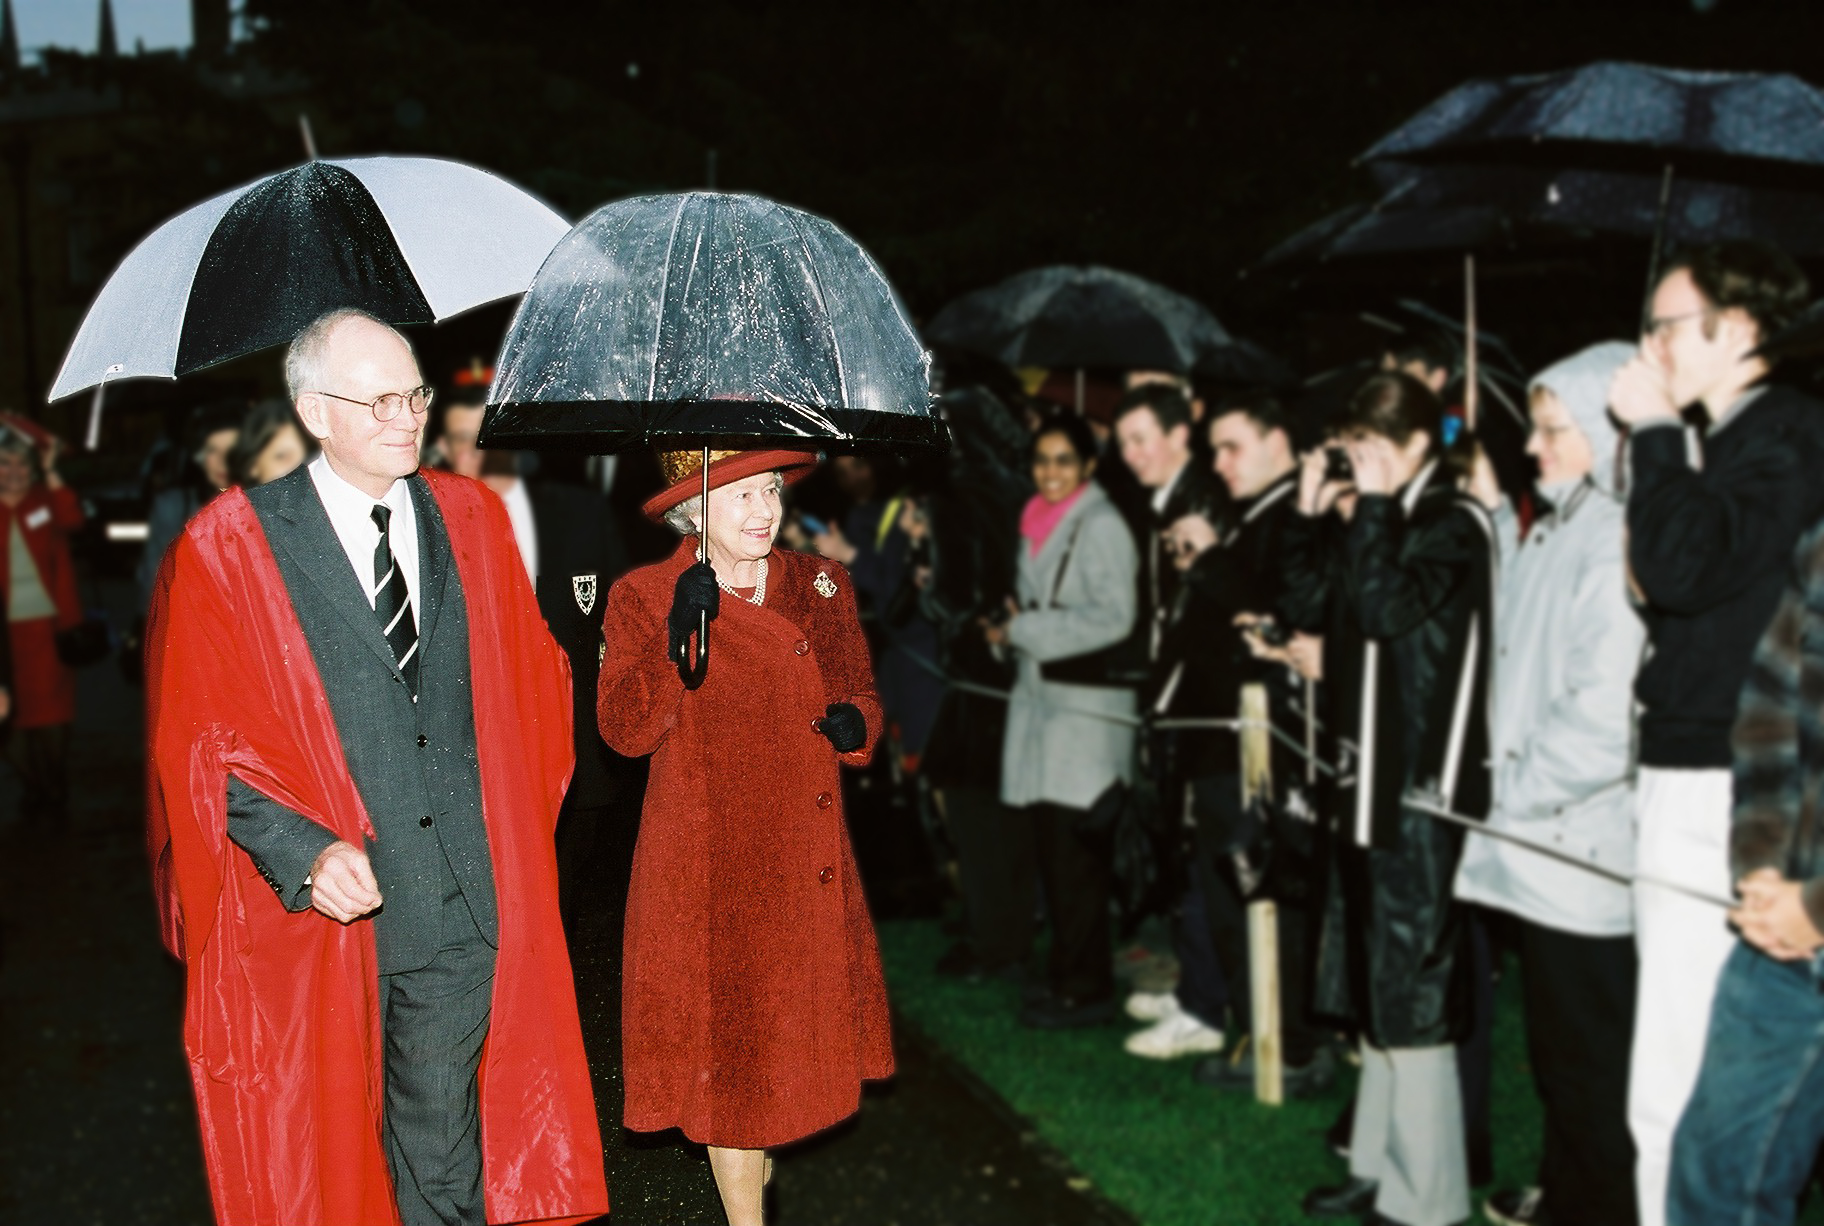 The queen with an umbrella at Trinity Hall in Cambridge. Smiling students line the path as she walks past.